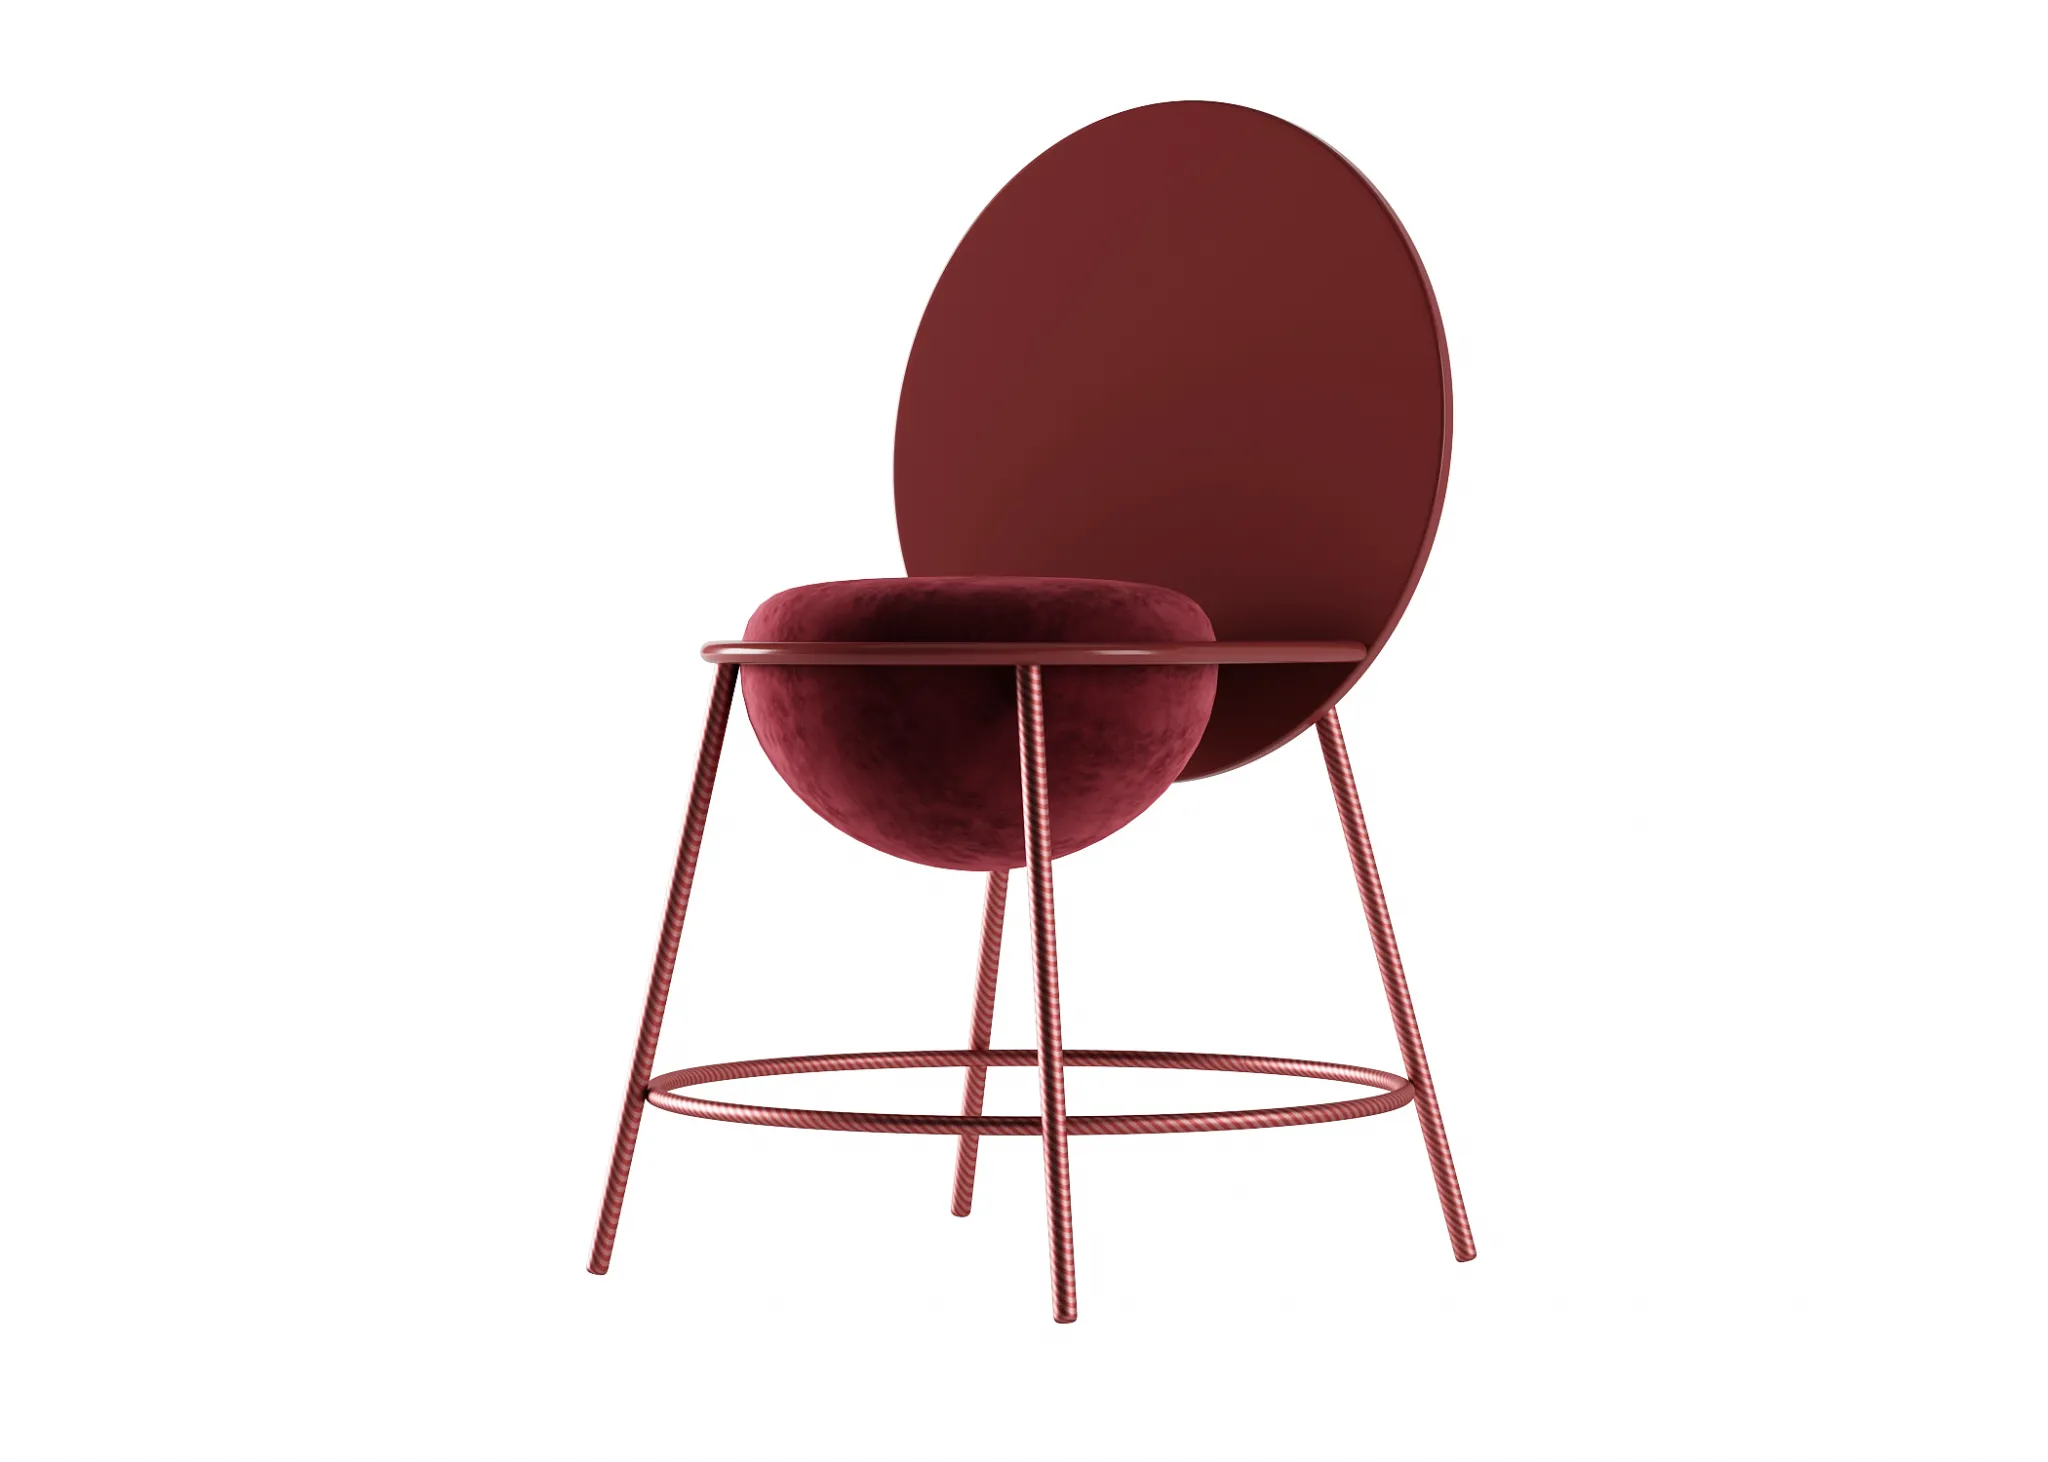 FURNITURE 3D MODELS – CHAIRS – 0057